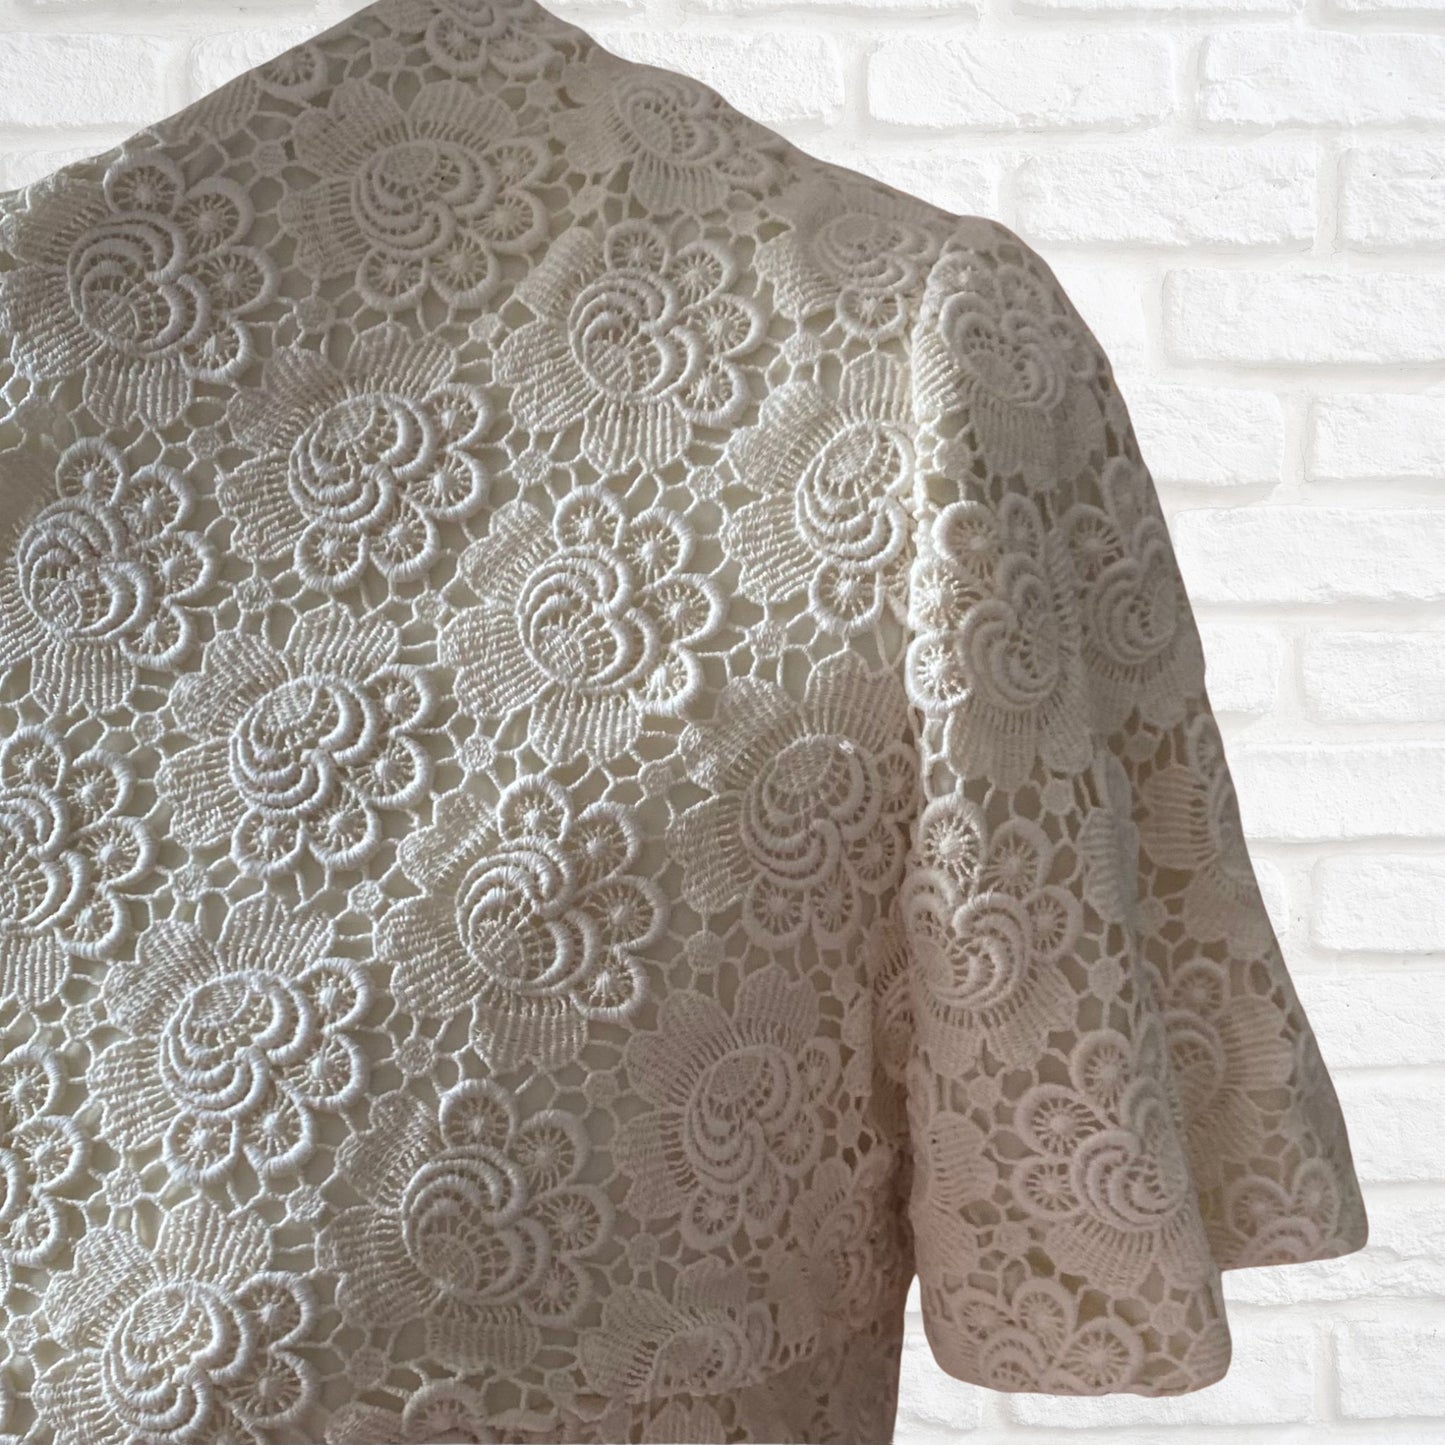 Vintage 60s Cream Floral Lace Short Sleeved Top. Approx UK size 10-12